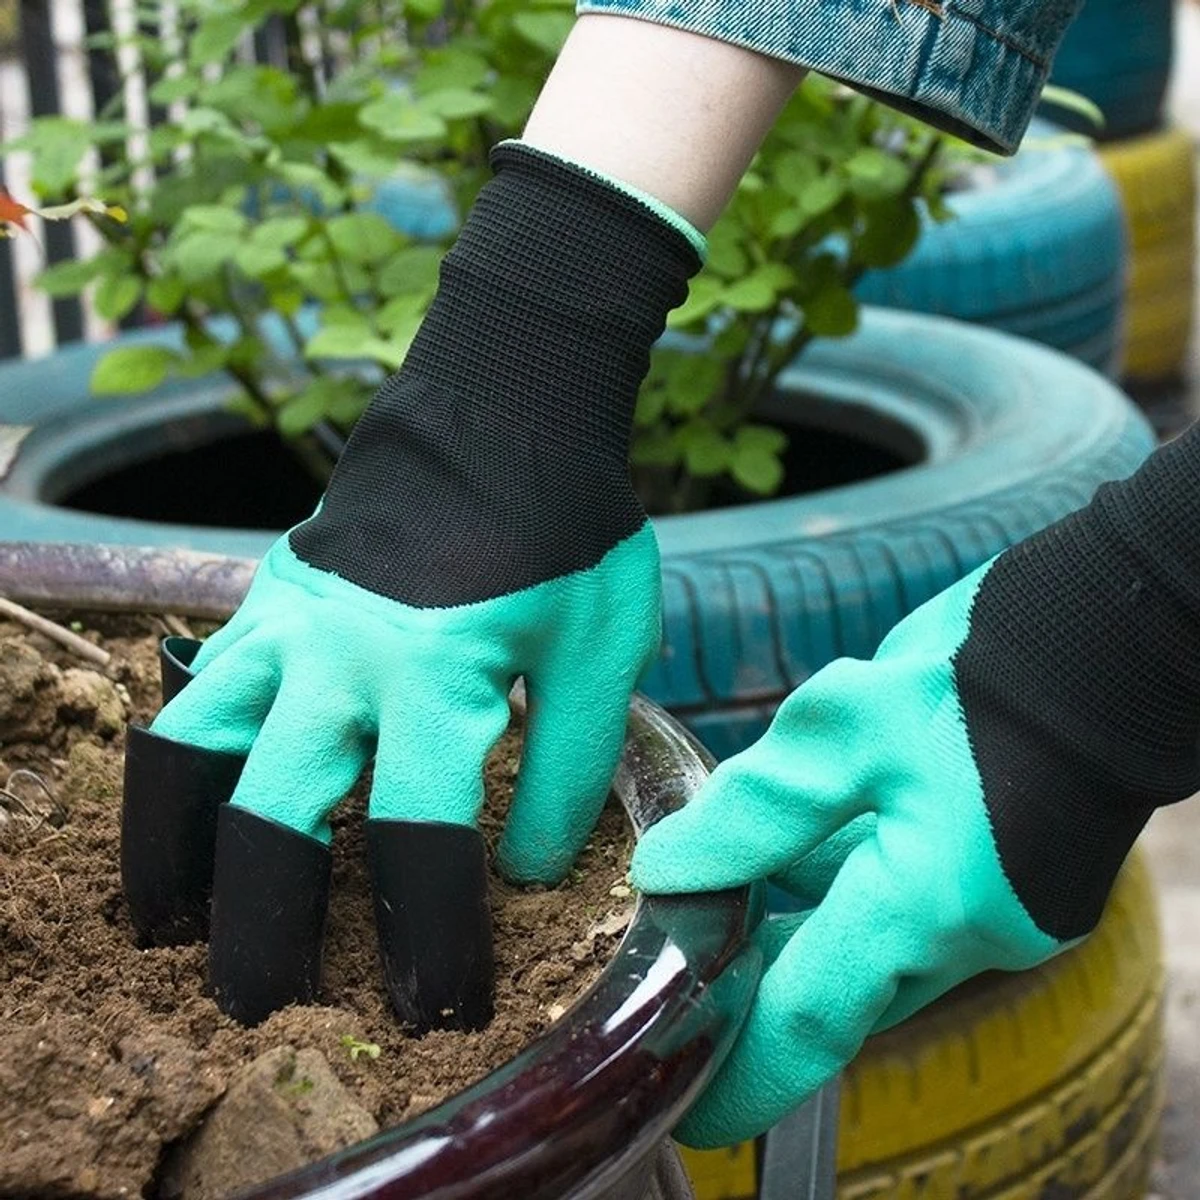 Garden work gloves with claws are suitable for planting digging glue dipping waterproof and protective weeding